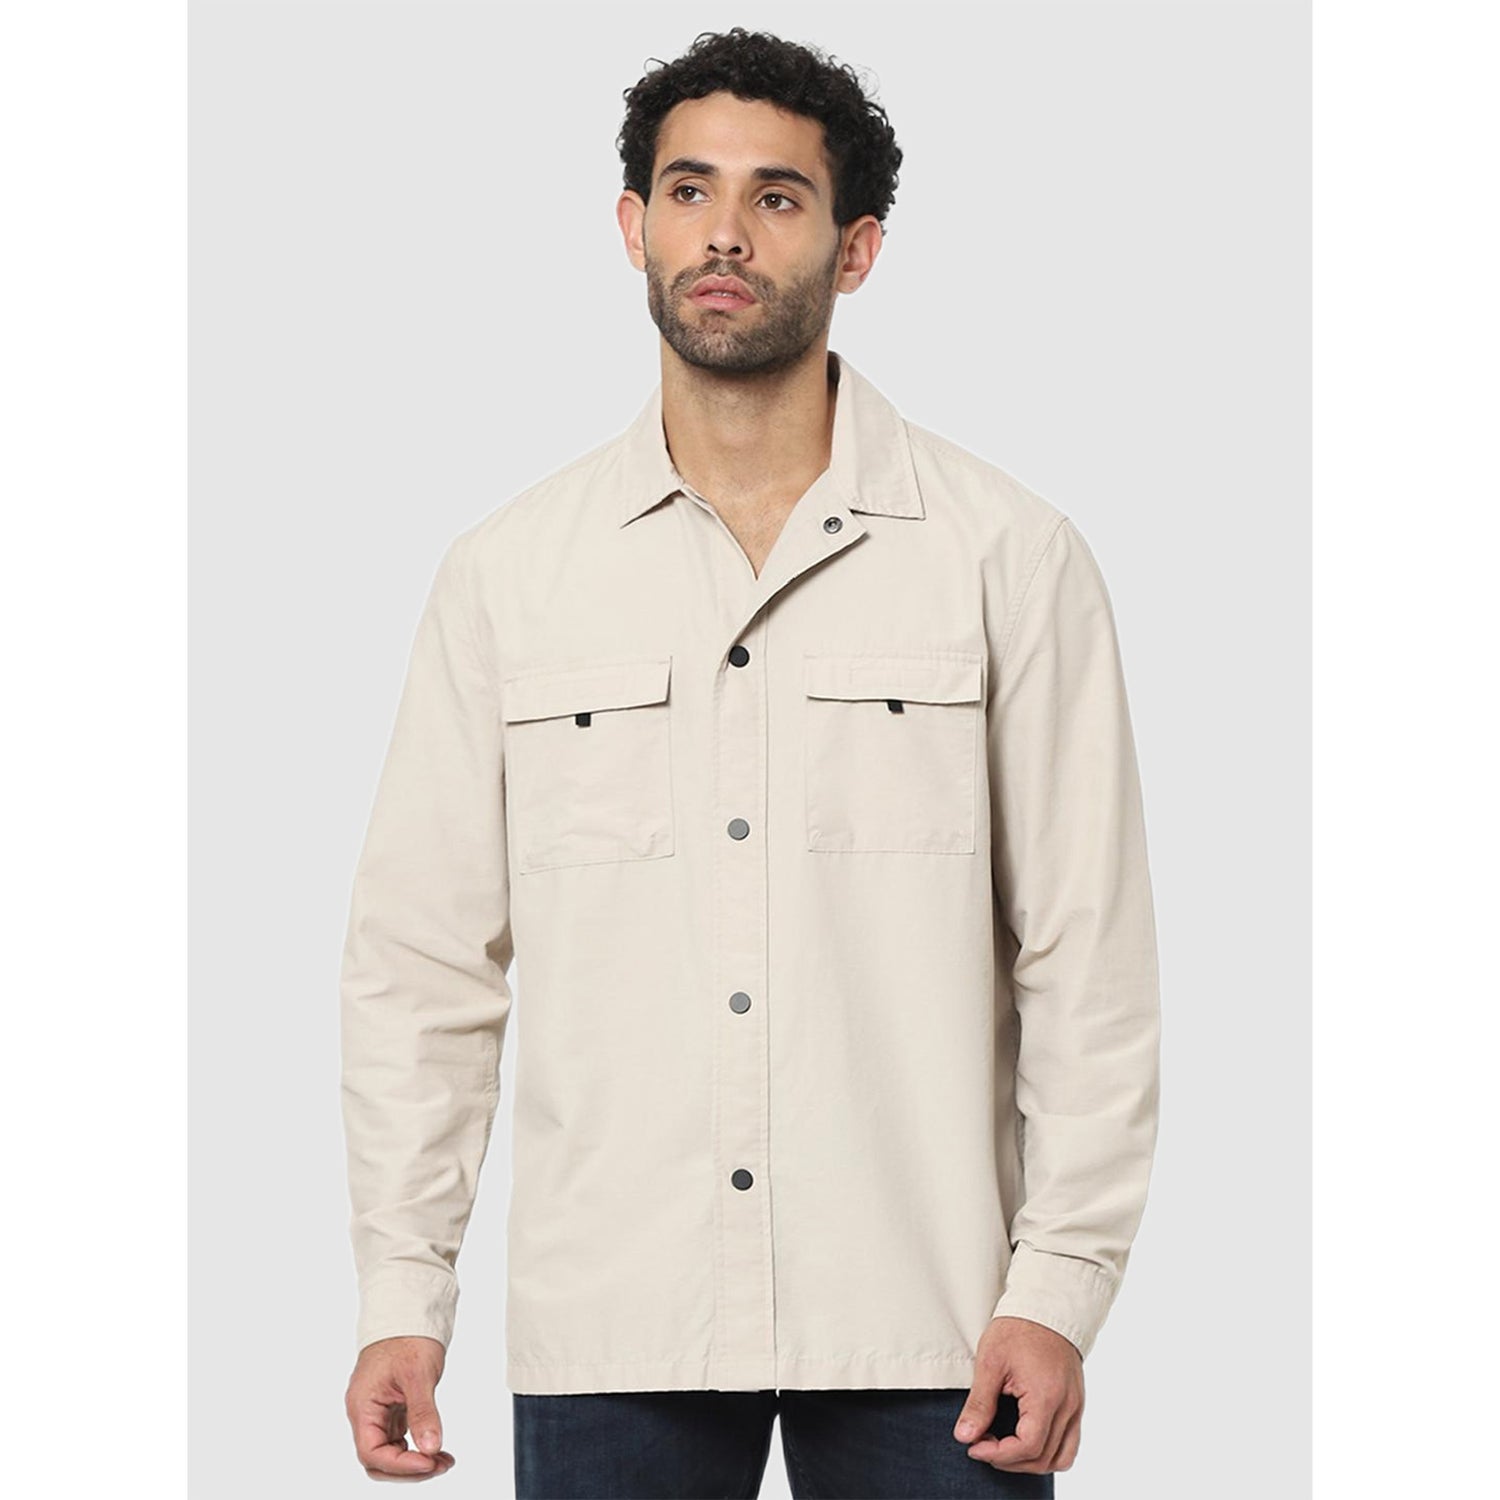 Beige Solid Relaxed Fit Classic Casual Shirt (BANYLON)